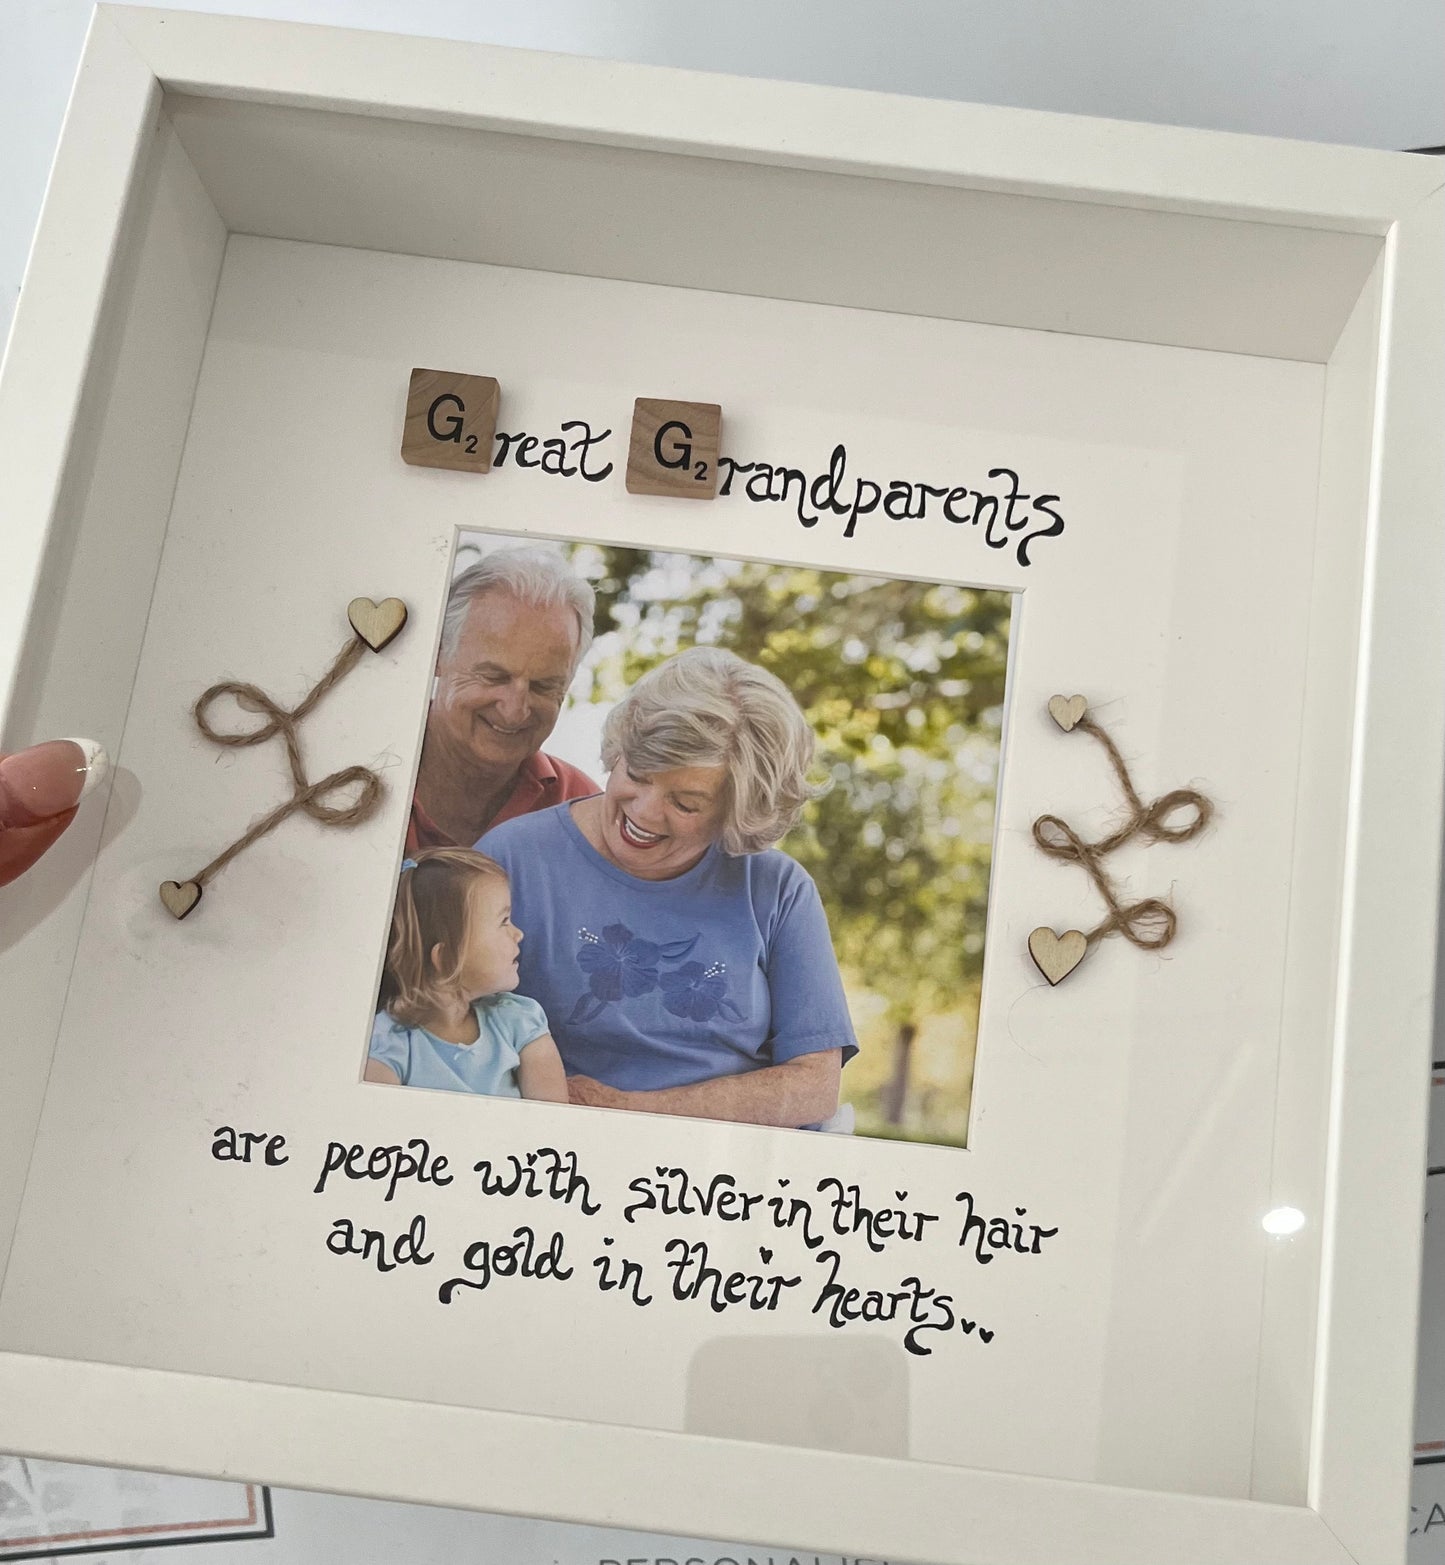 Grandparents Frame (Grandparents have silver in their hair and gold in their hearts)